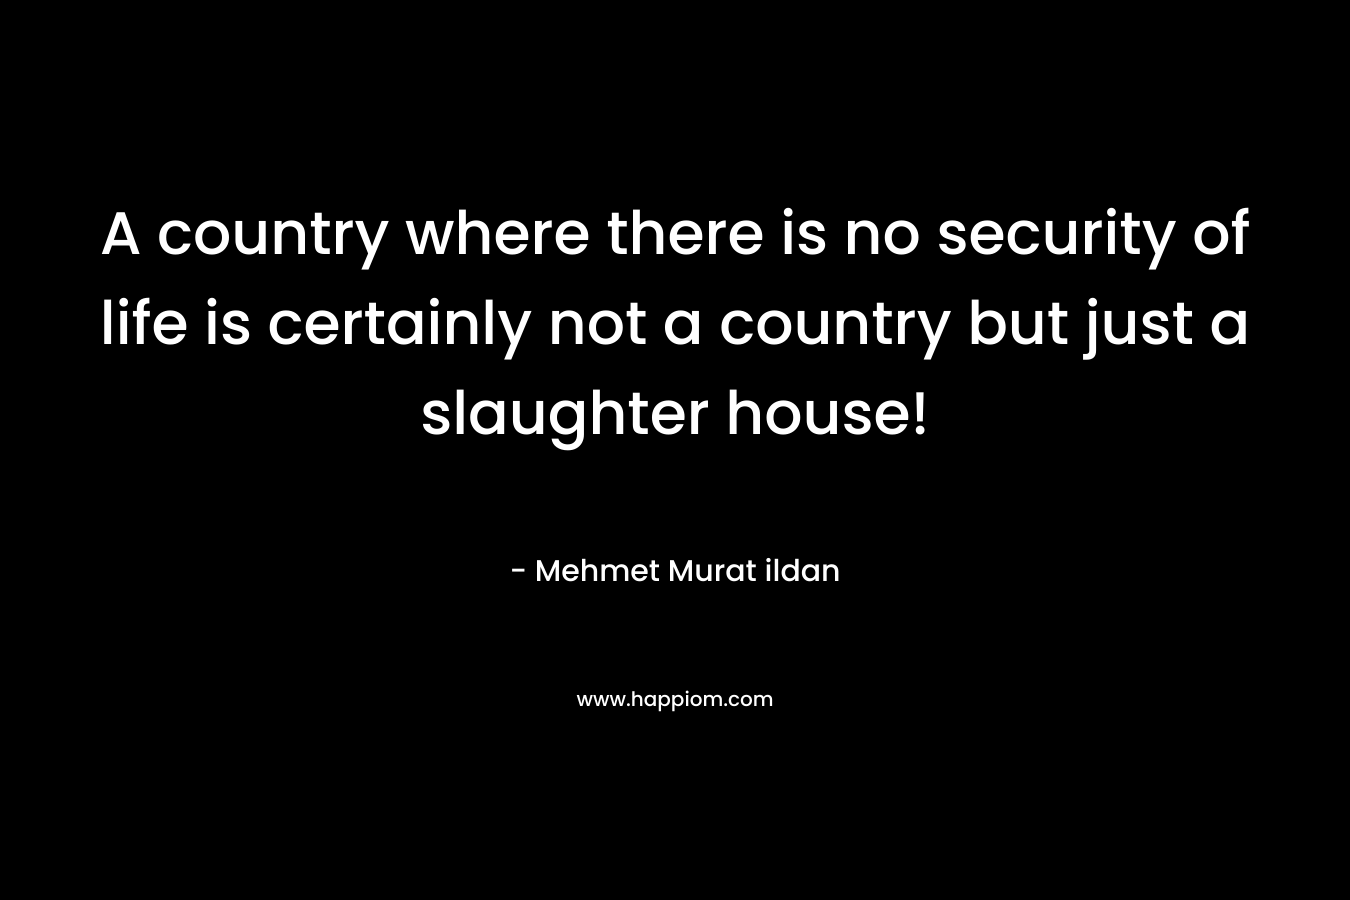 A country where there is no security of life is certainly not a country but just a slaughter house! – Mehmet Murat ildan